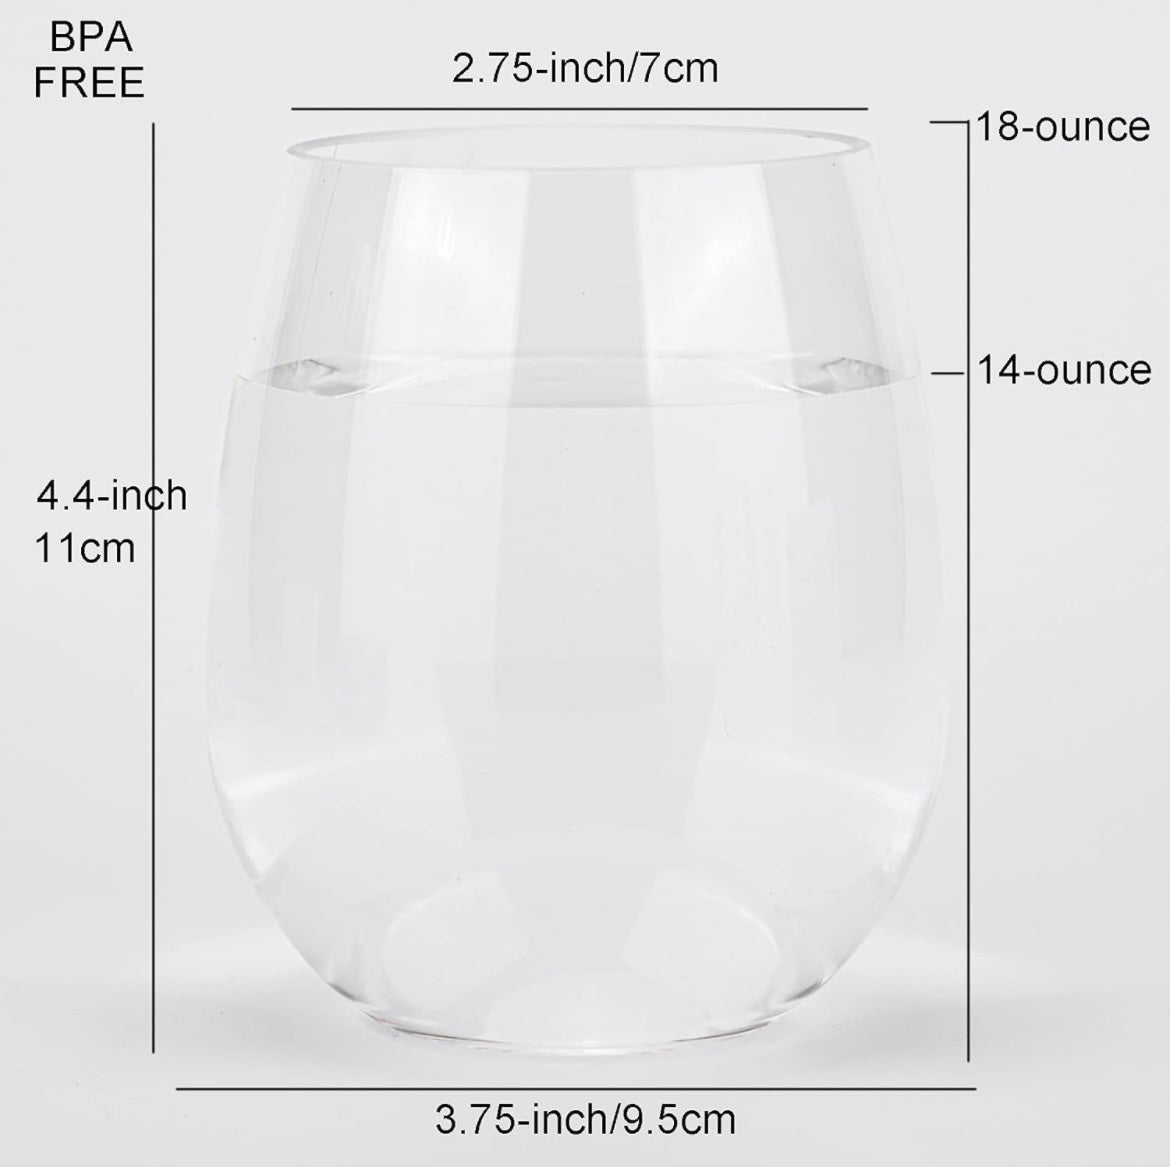 KOXIN-KARLU Classic 18-ounce Acrylic Stemless Wine Glasses, Unbreakable Mixed Drinkware Plastic Tumbler, set of 6 Clear